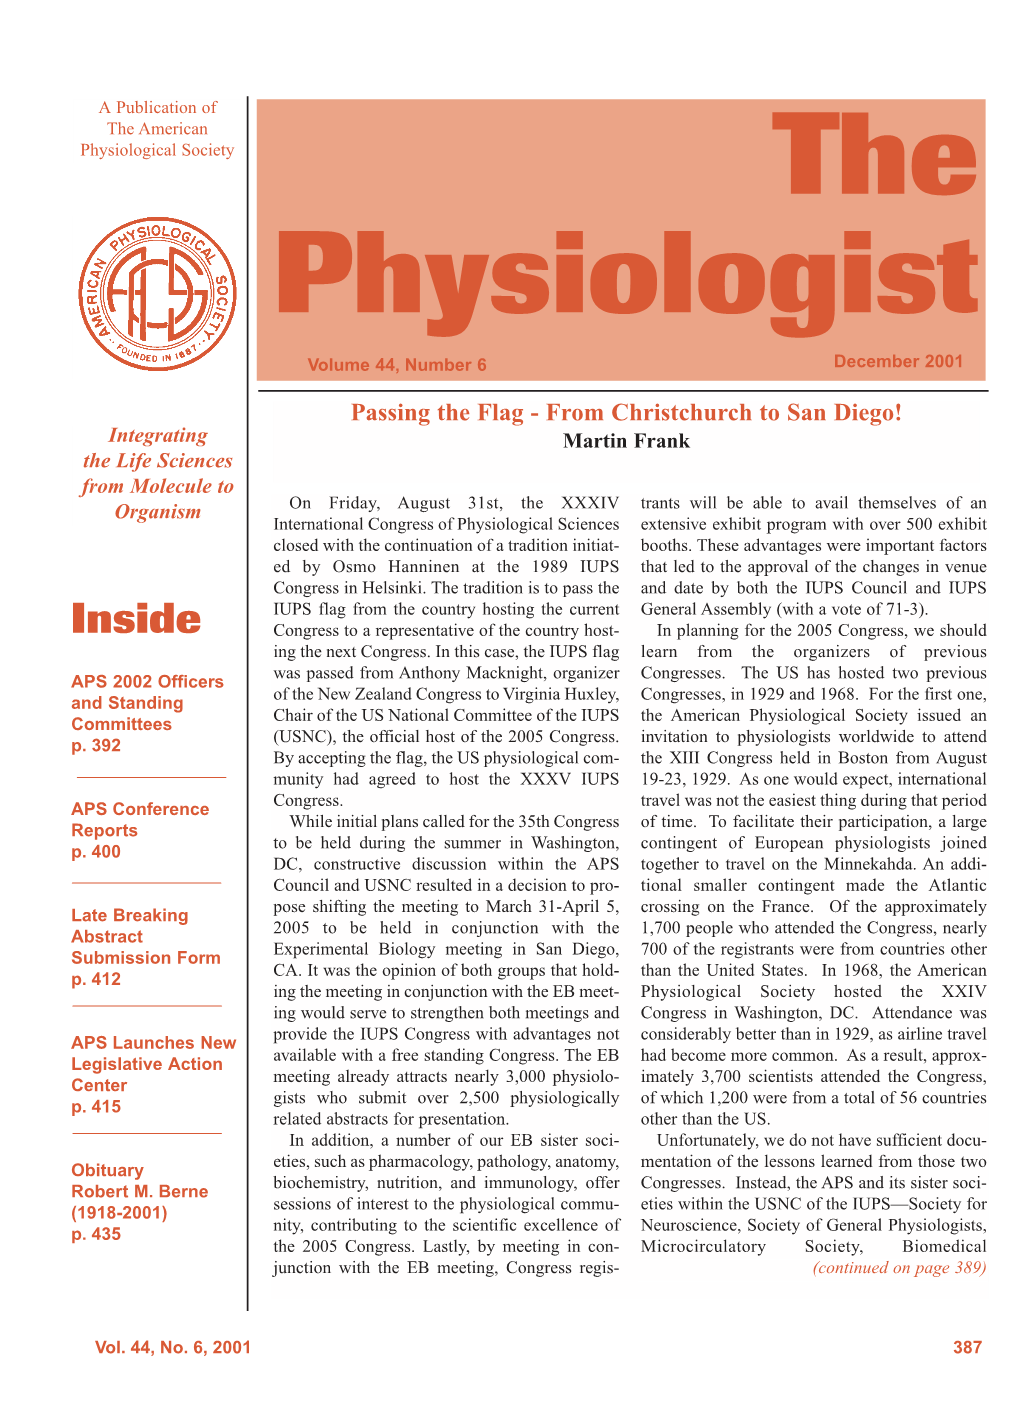 The Physiologist